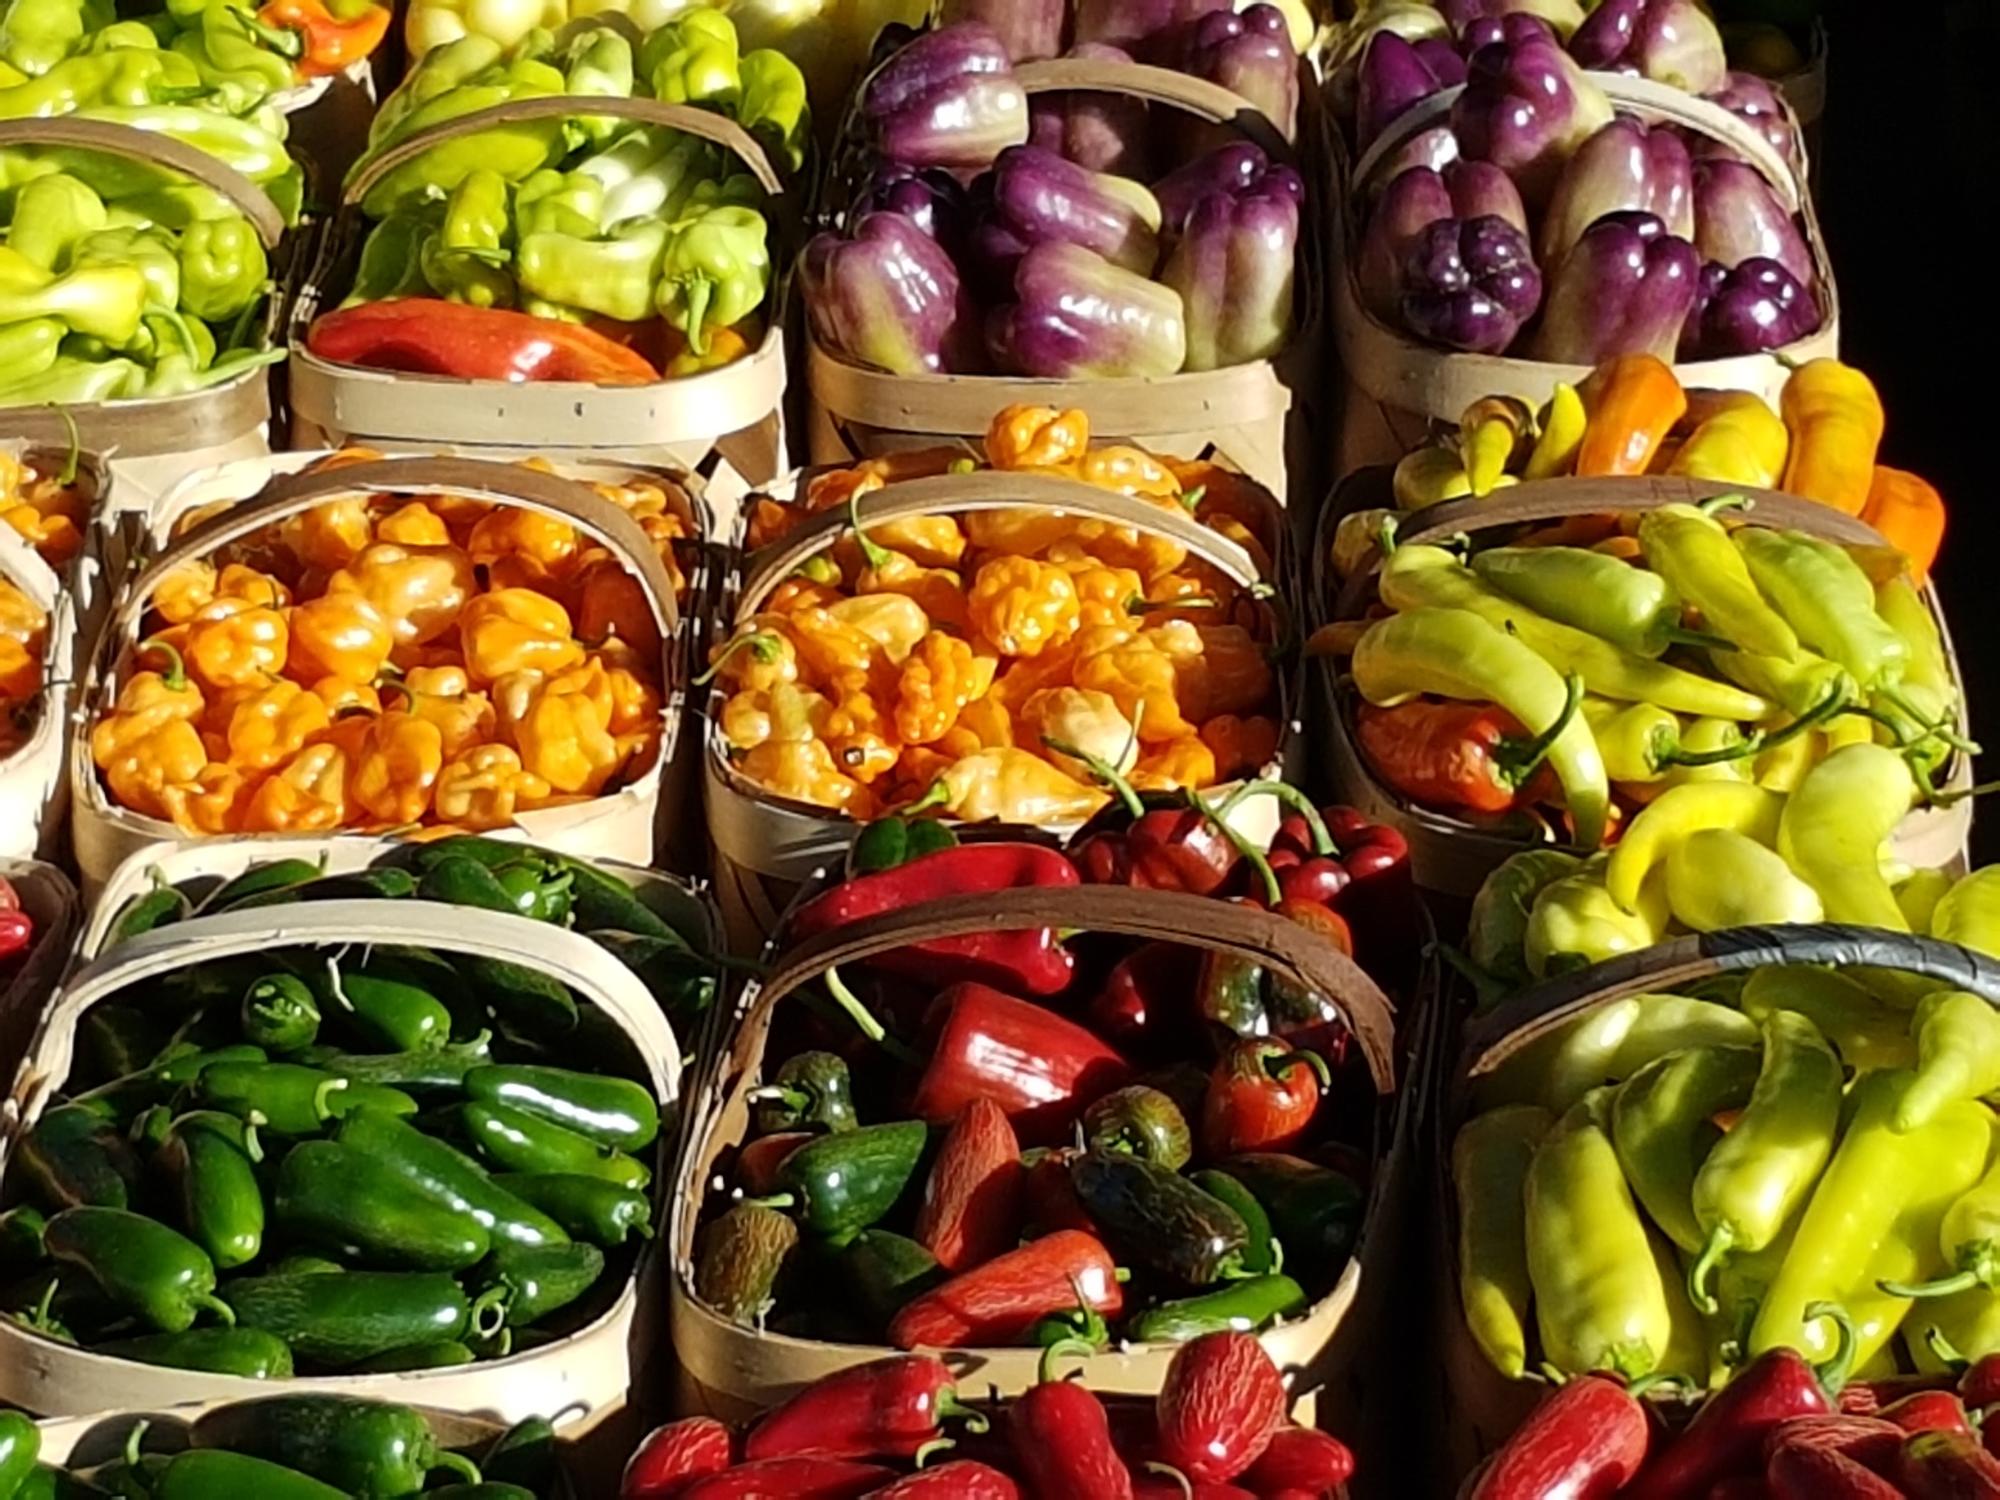 baskets of green, red, orange, yellow and purple peppers